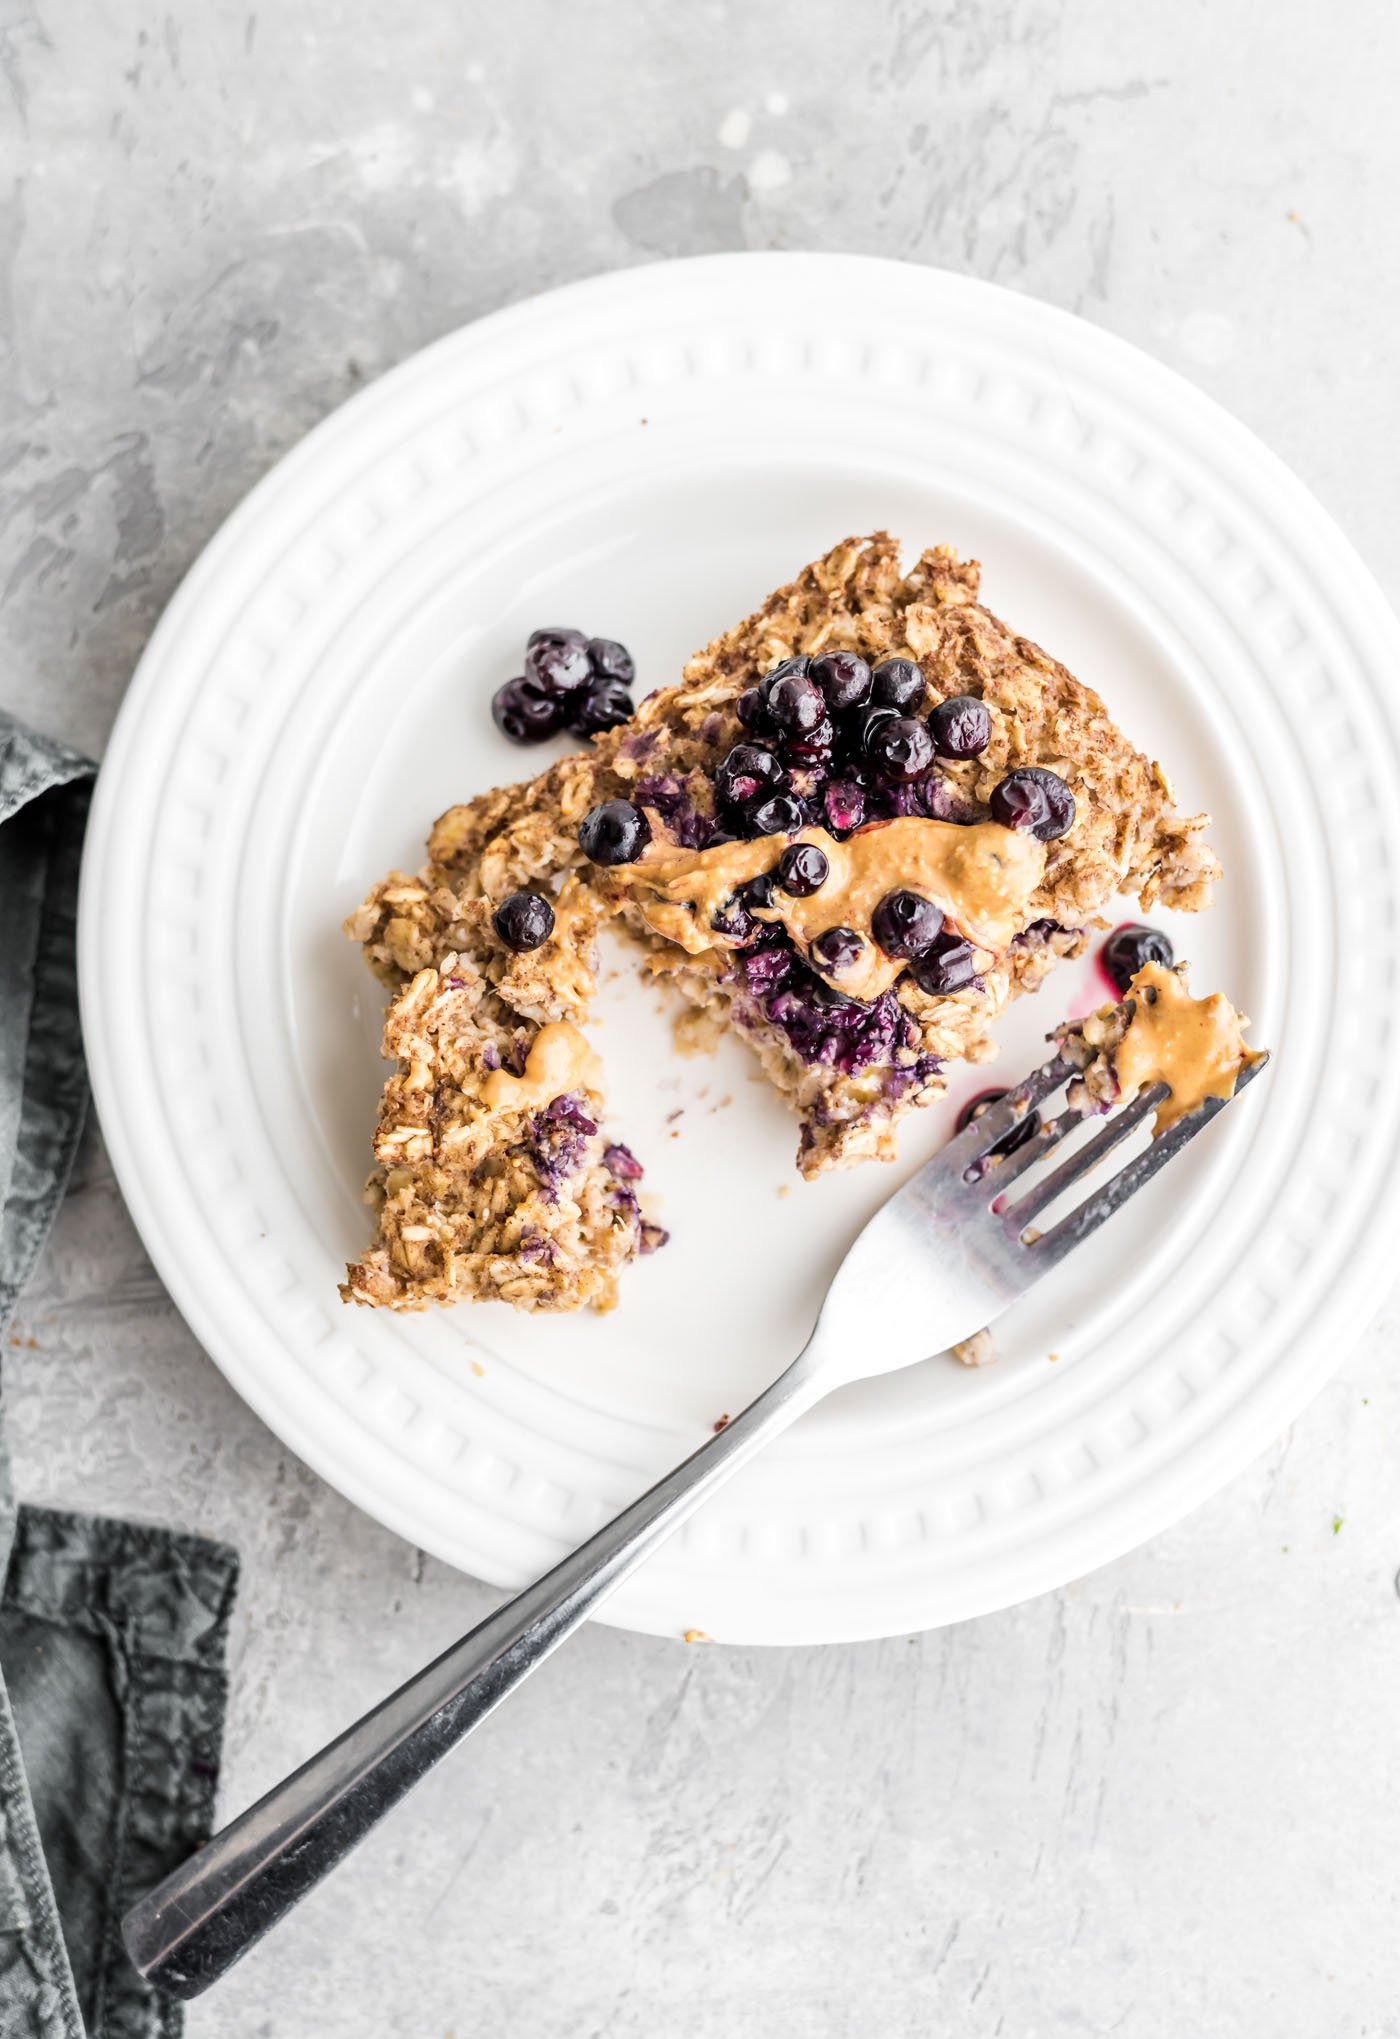 A slice of baked banana oatmeal topped with peanut butter and berries on a plate.